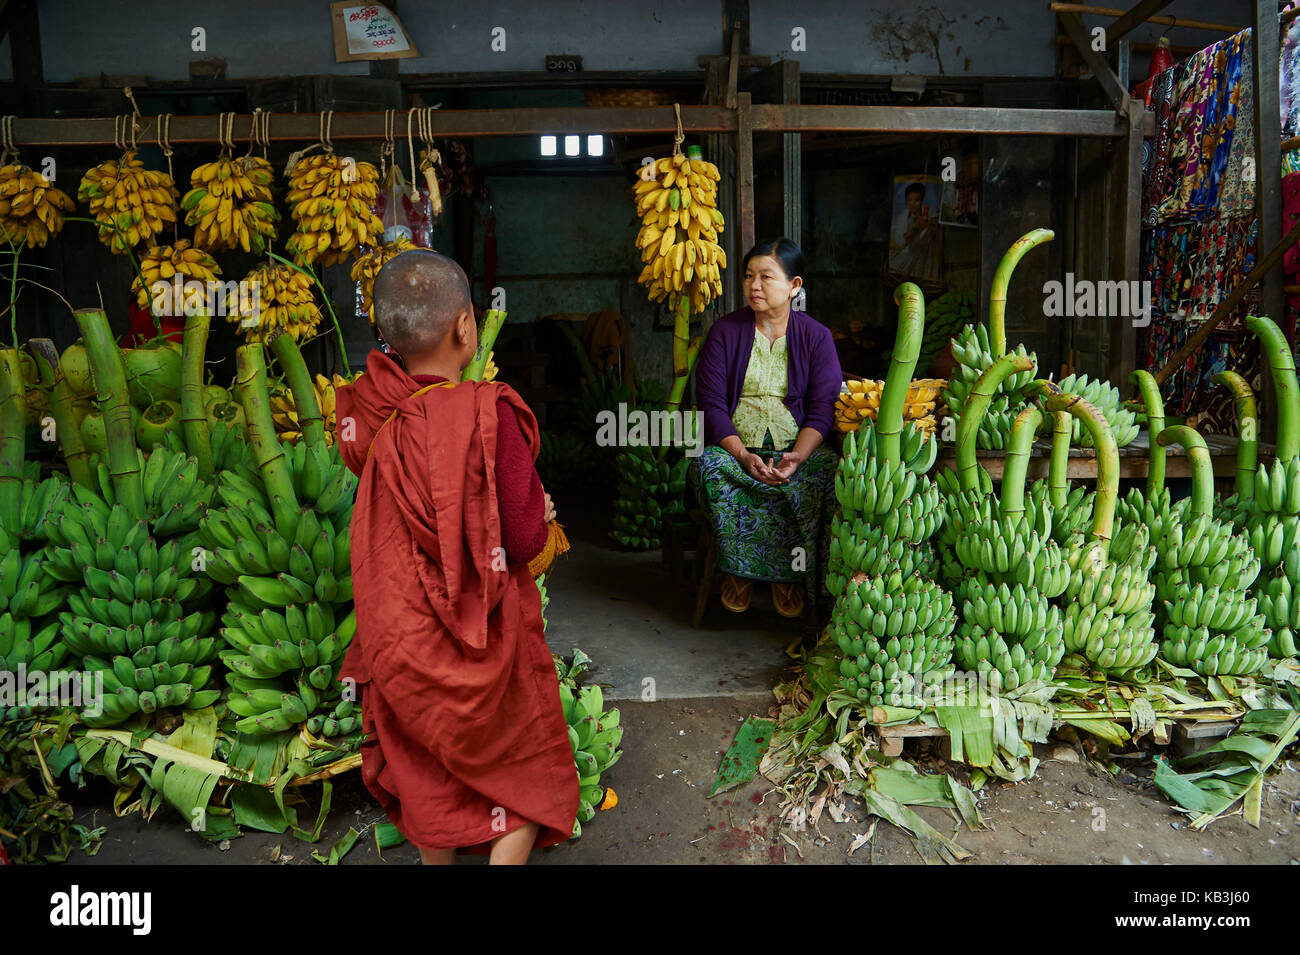 Monk at a market stall, Mandalay, Myanmar, l'Asie, Banque D'Images